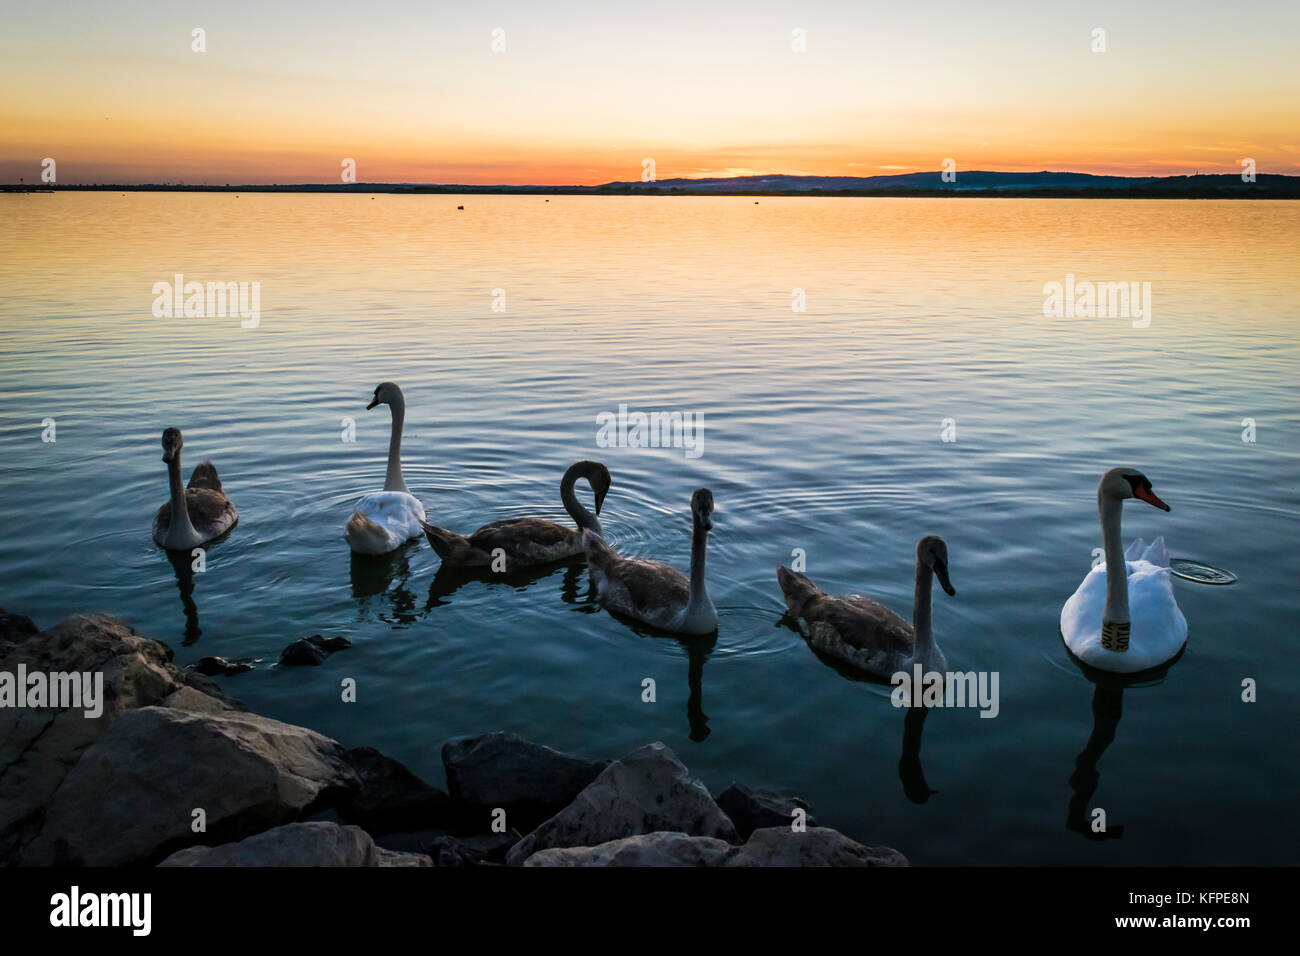 Swans in a lake at sunset. Swan family swims at summer evening close to the shore of lake Velence, Hungary. Stock Photo